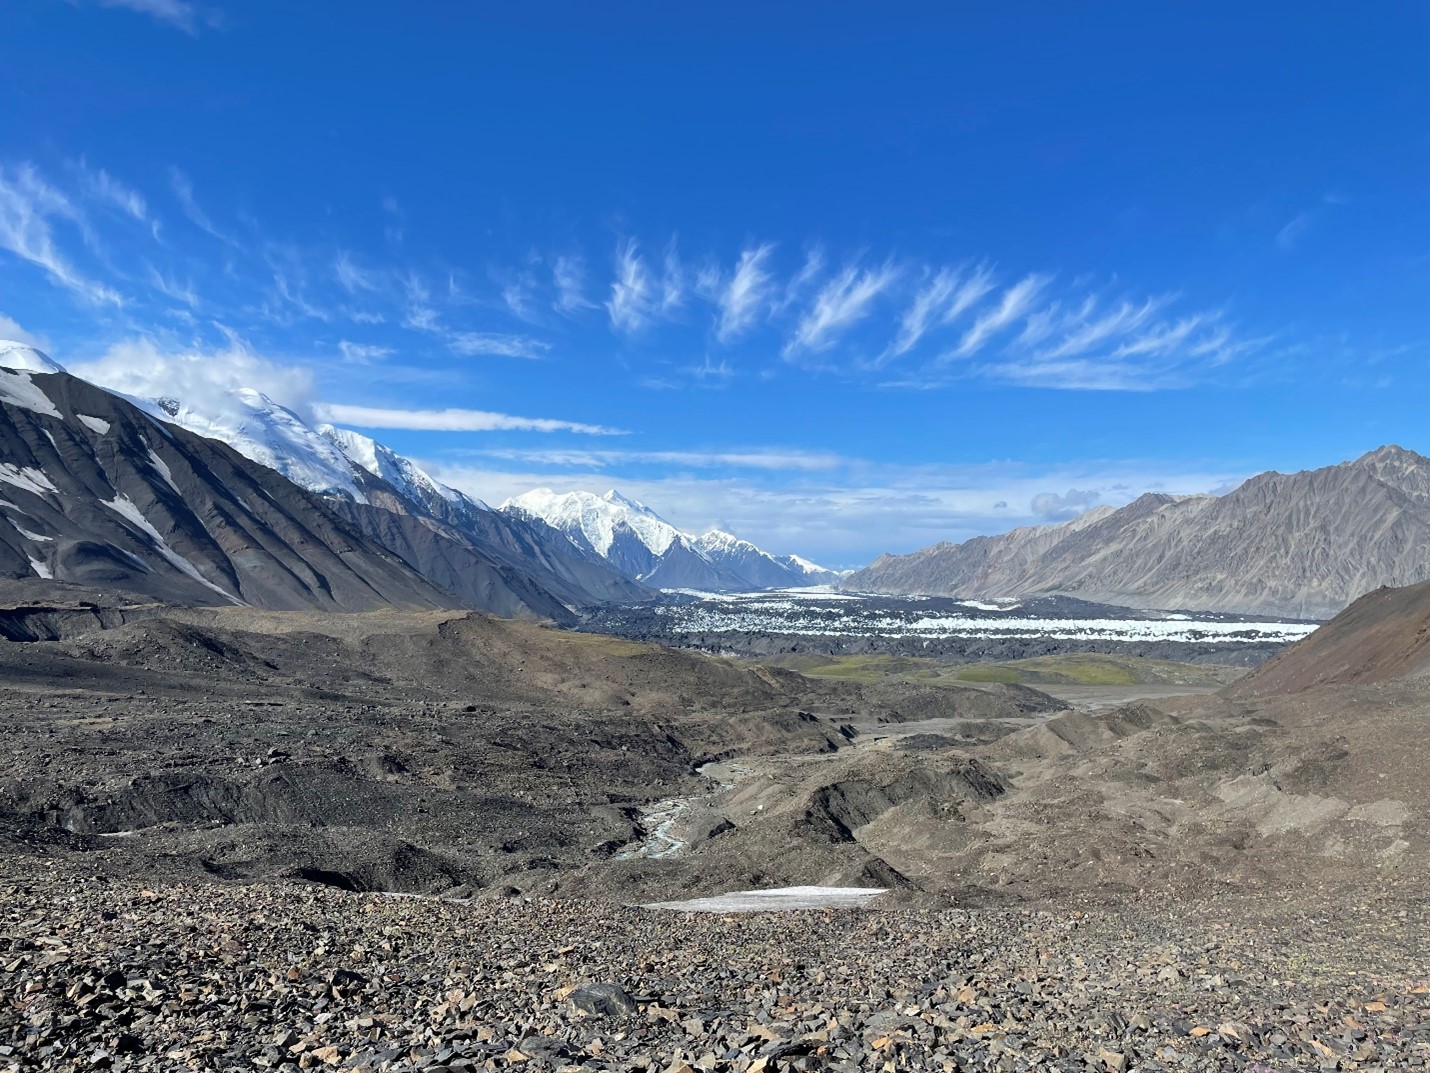 View of a rocky glacial moraine with bright blue sky and snow covered peaks in the distance